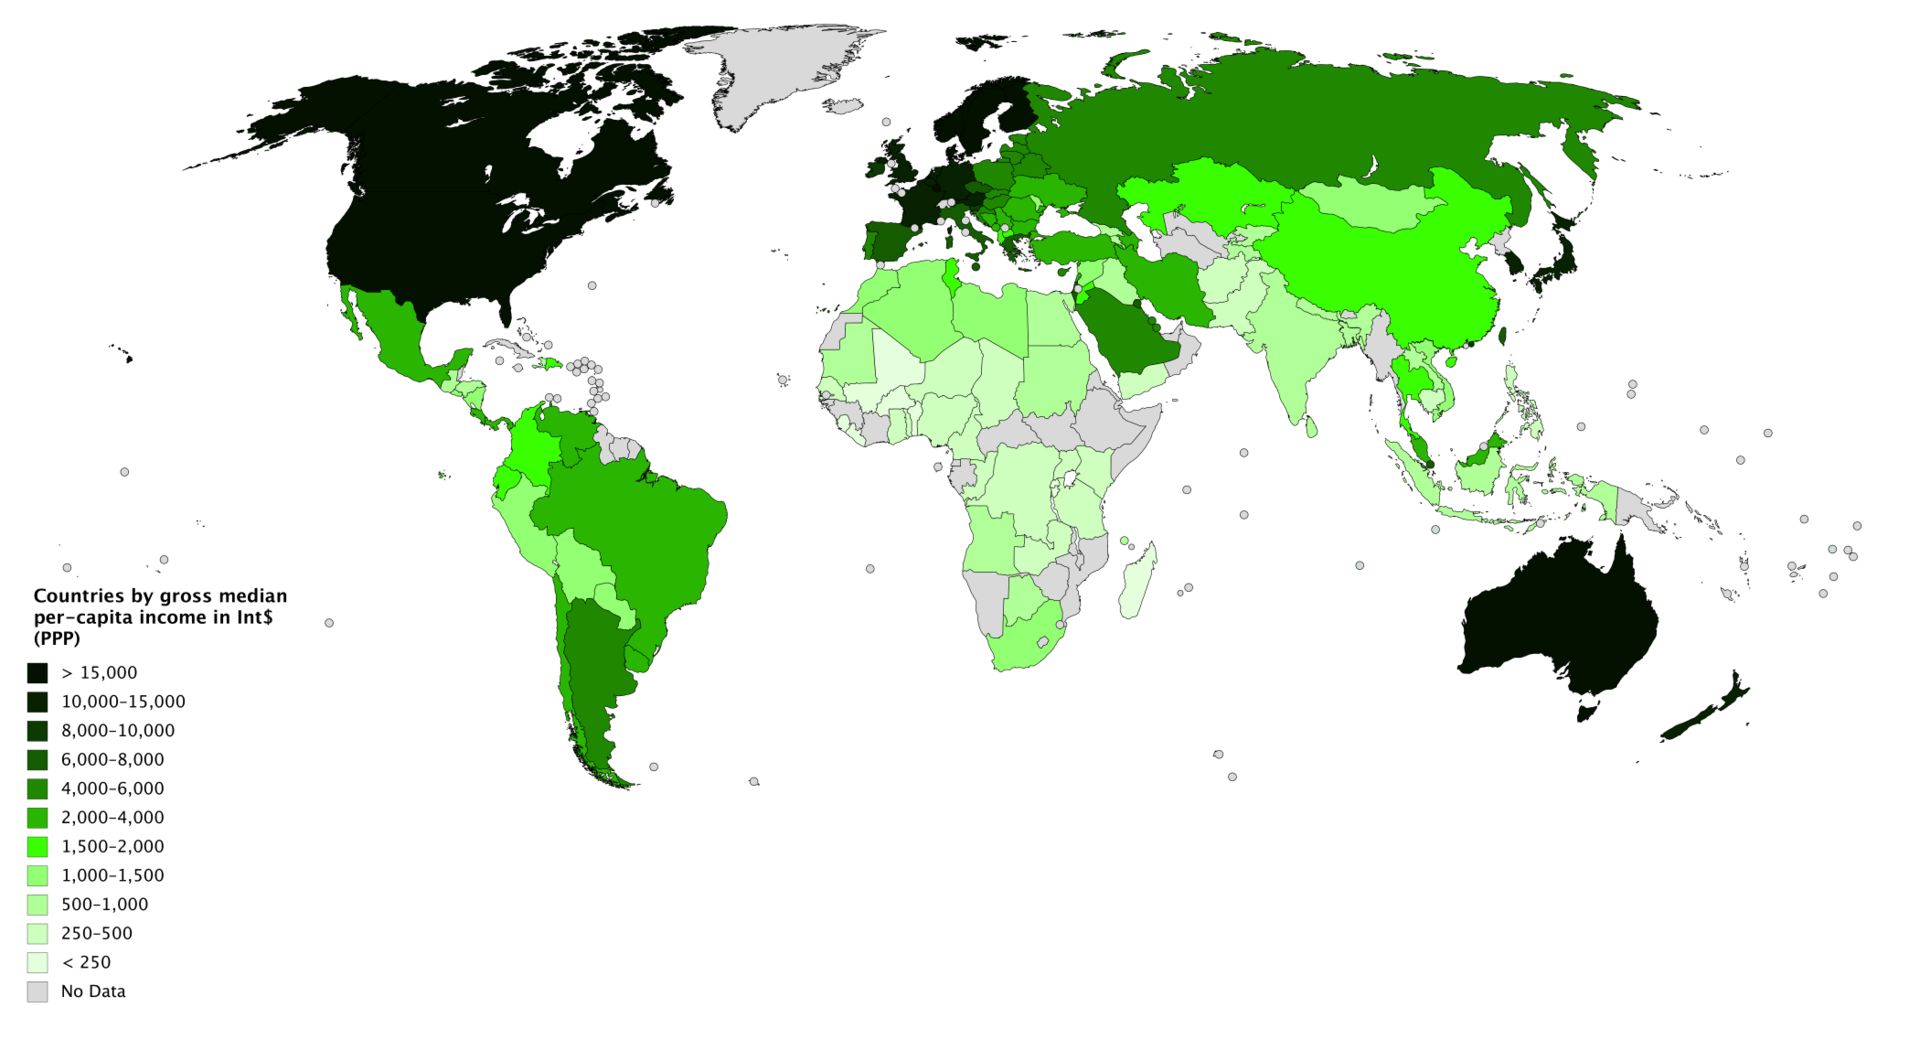 1920px-Countries_by_gross_median_per-capita_income_in_Int%24_%28PPP%29.png